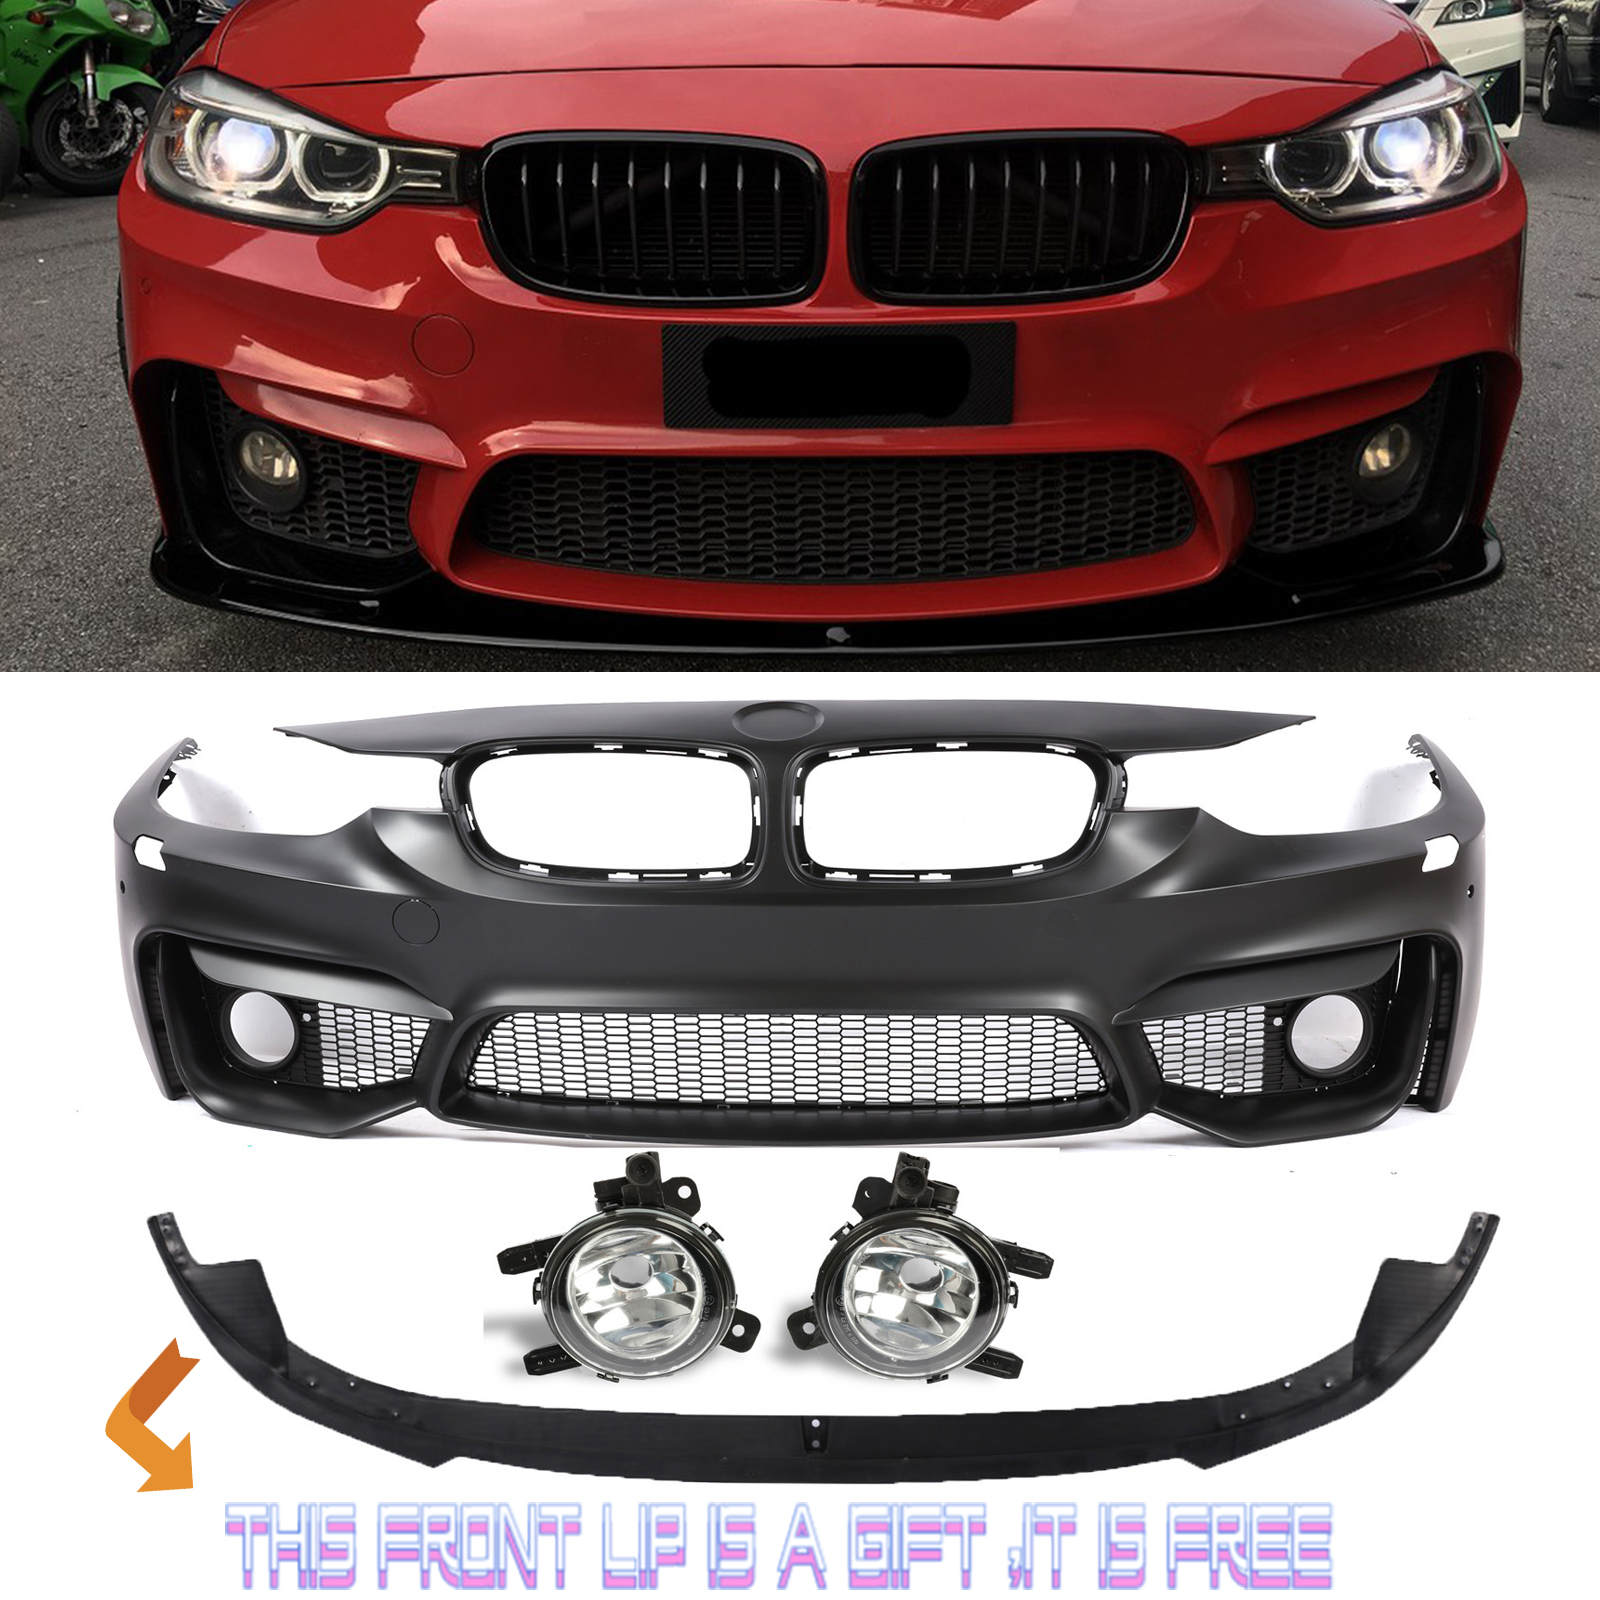 F80 M3 Style Font Bumper FOR BMW F30 F31 3 SERIES W/O PDC